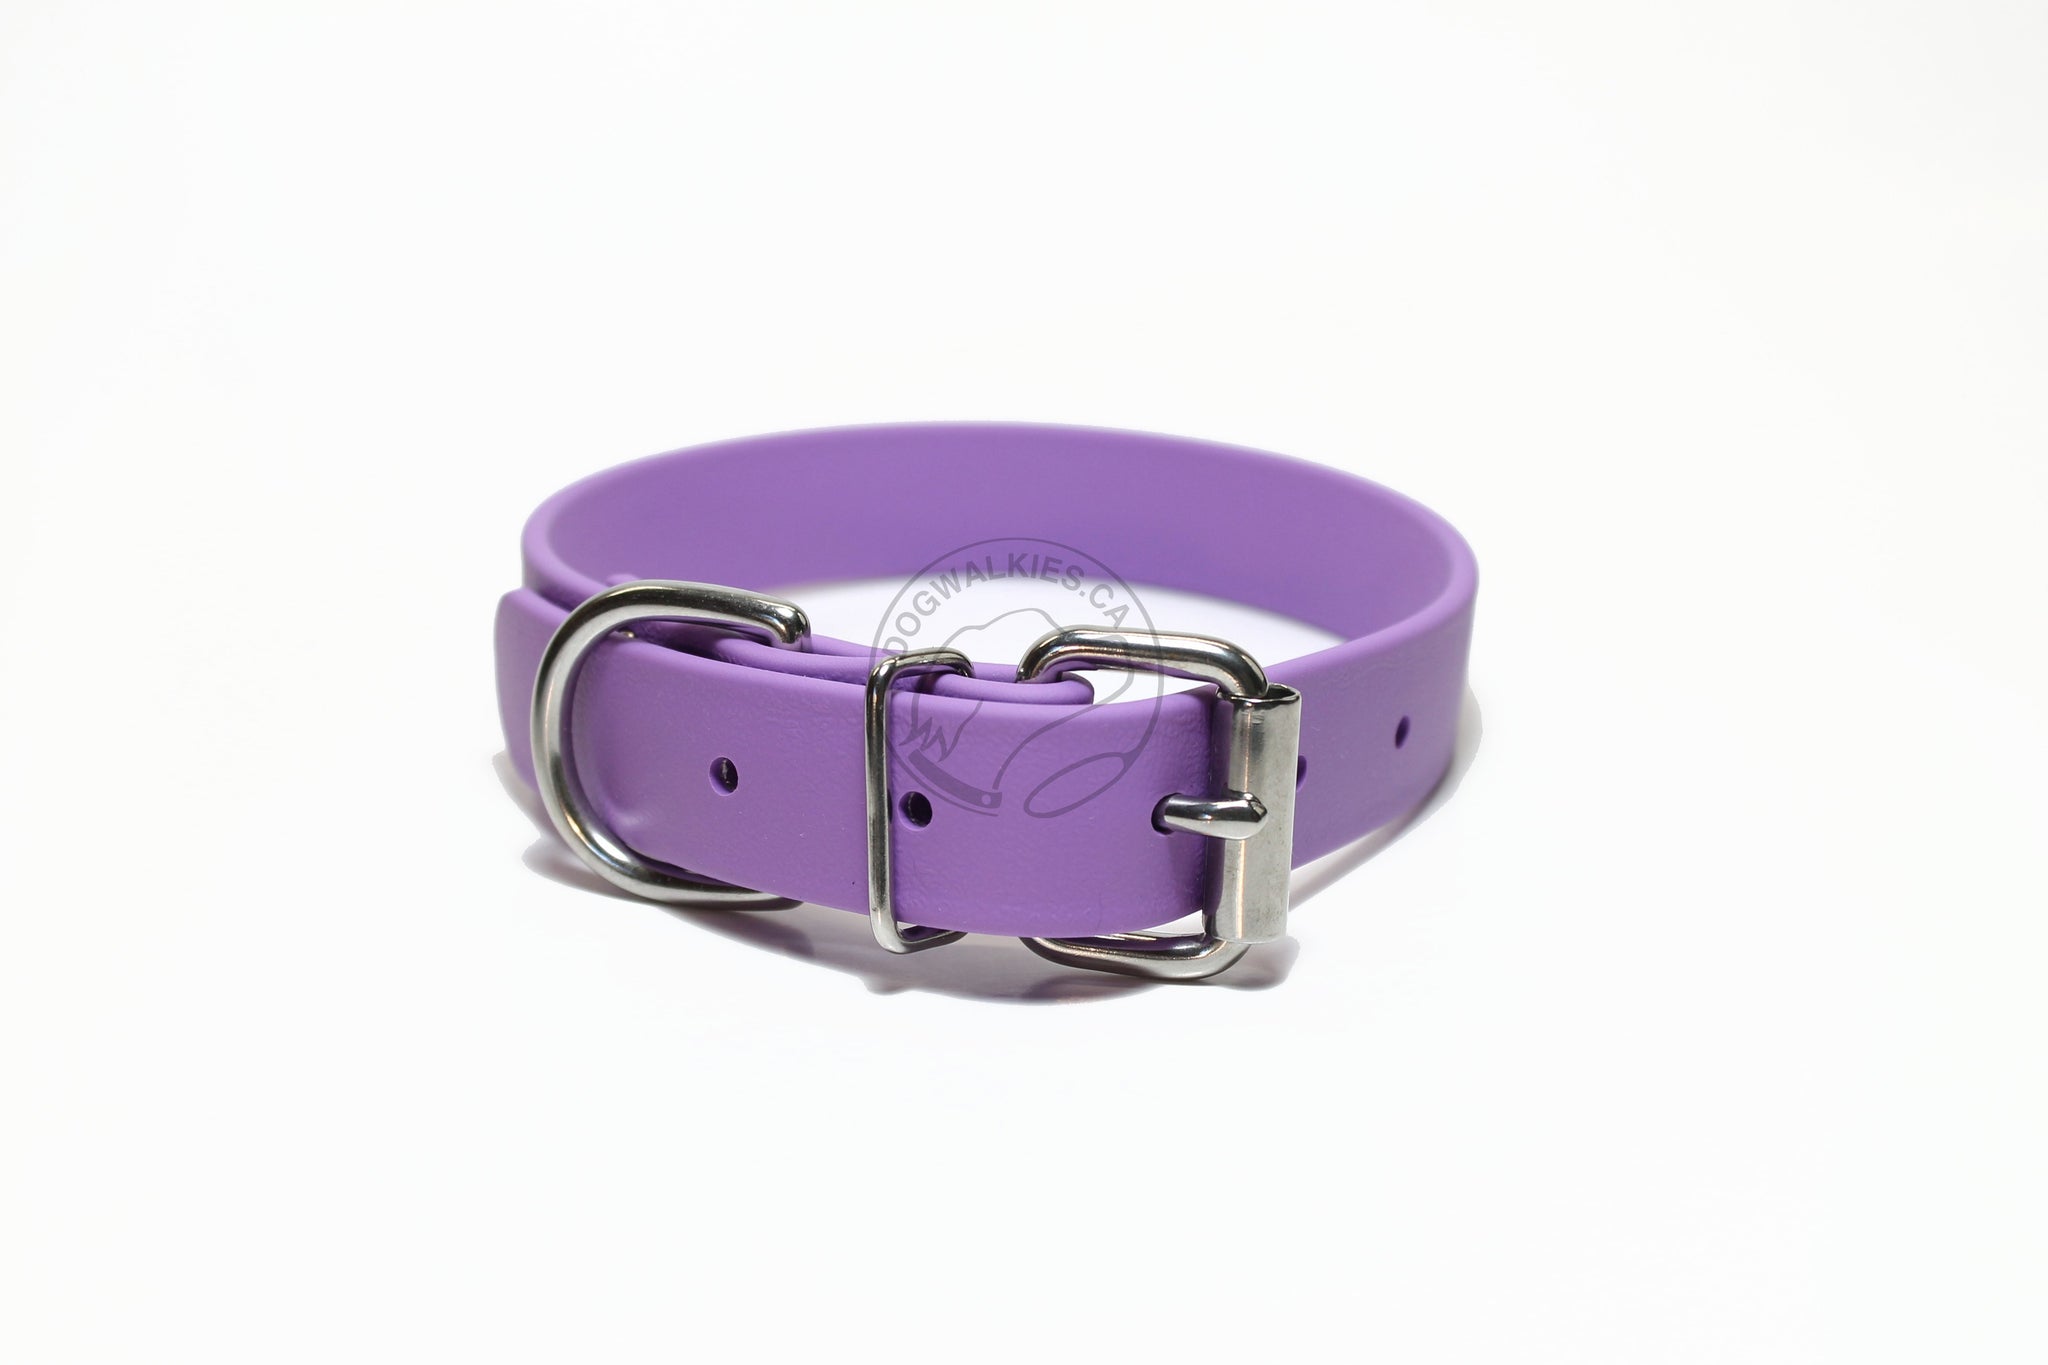 Handmade Amethyst Purple Dog Collar with Biothane Coated Webbing - Vegan, Waterproof, Custom Sized - Stainless Steel Hardware - Lilac and Orchid purple Accents